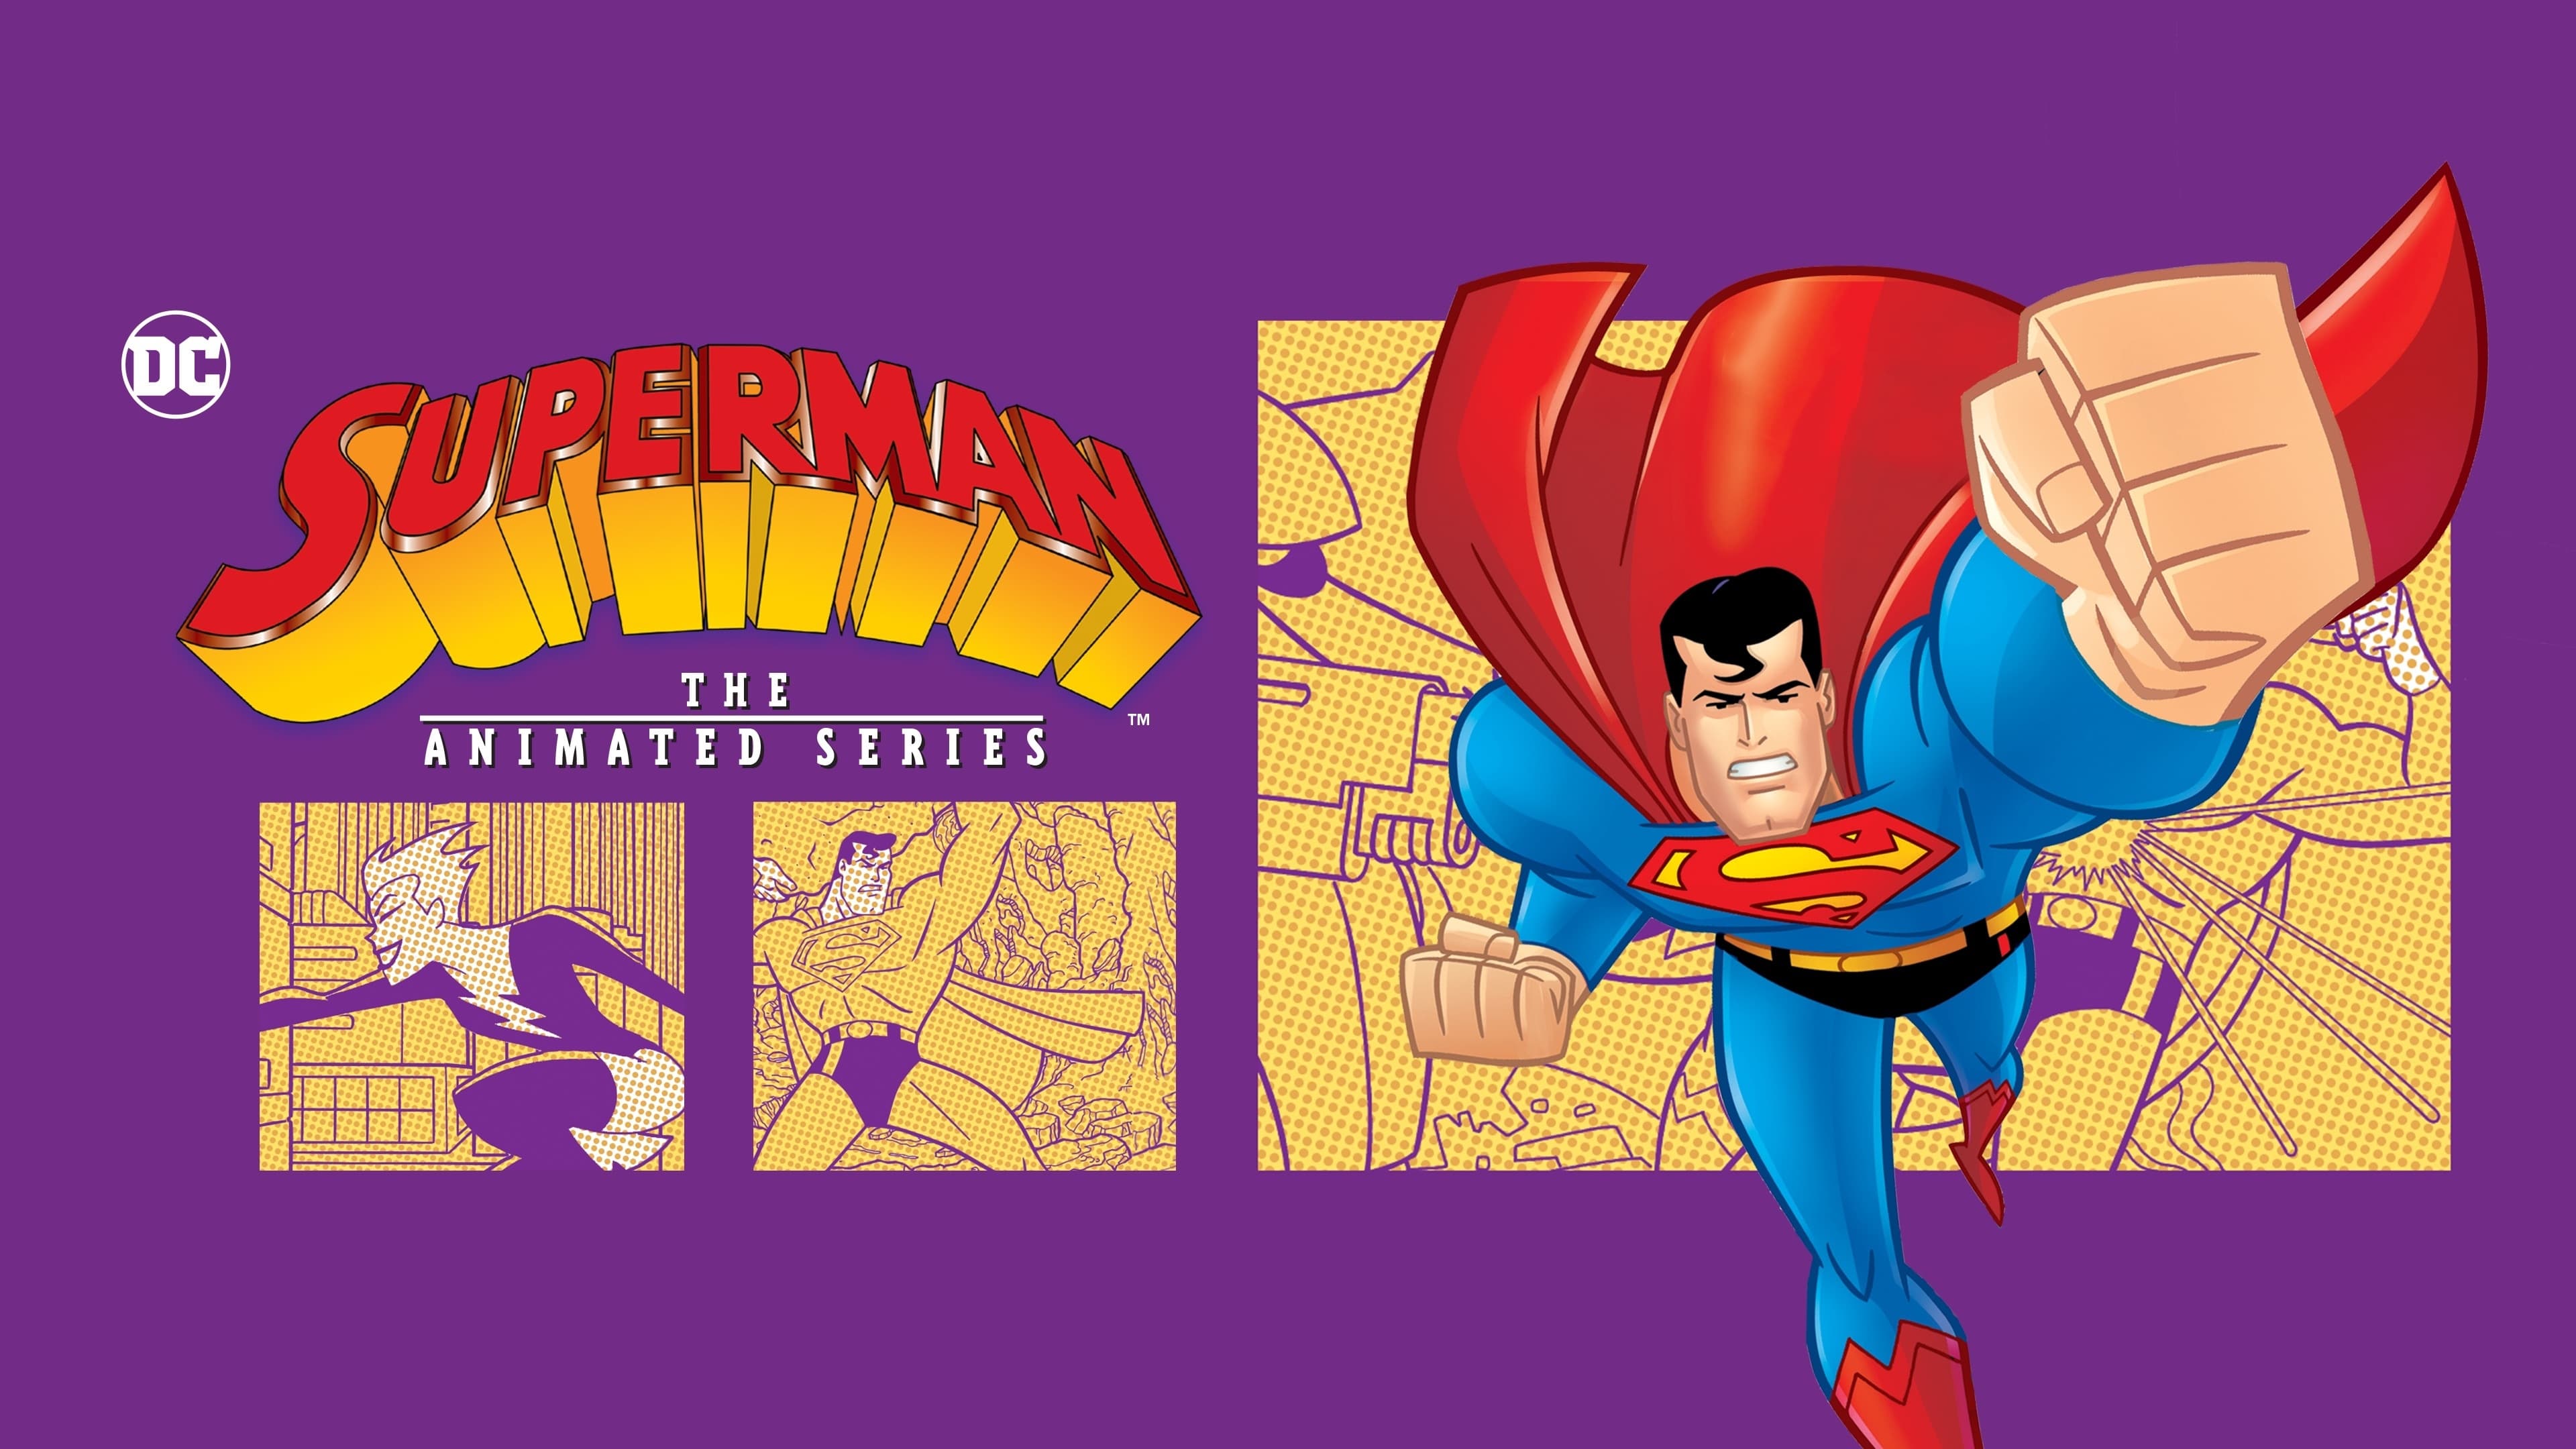 Superman: The Animated Series wallpapers for desktop, download free Superman:  The Animated Series pictures and backgrounds for PC 